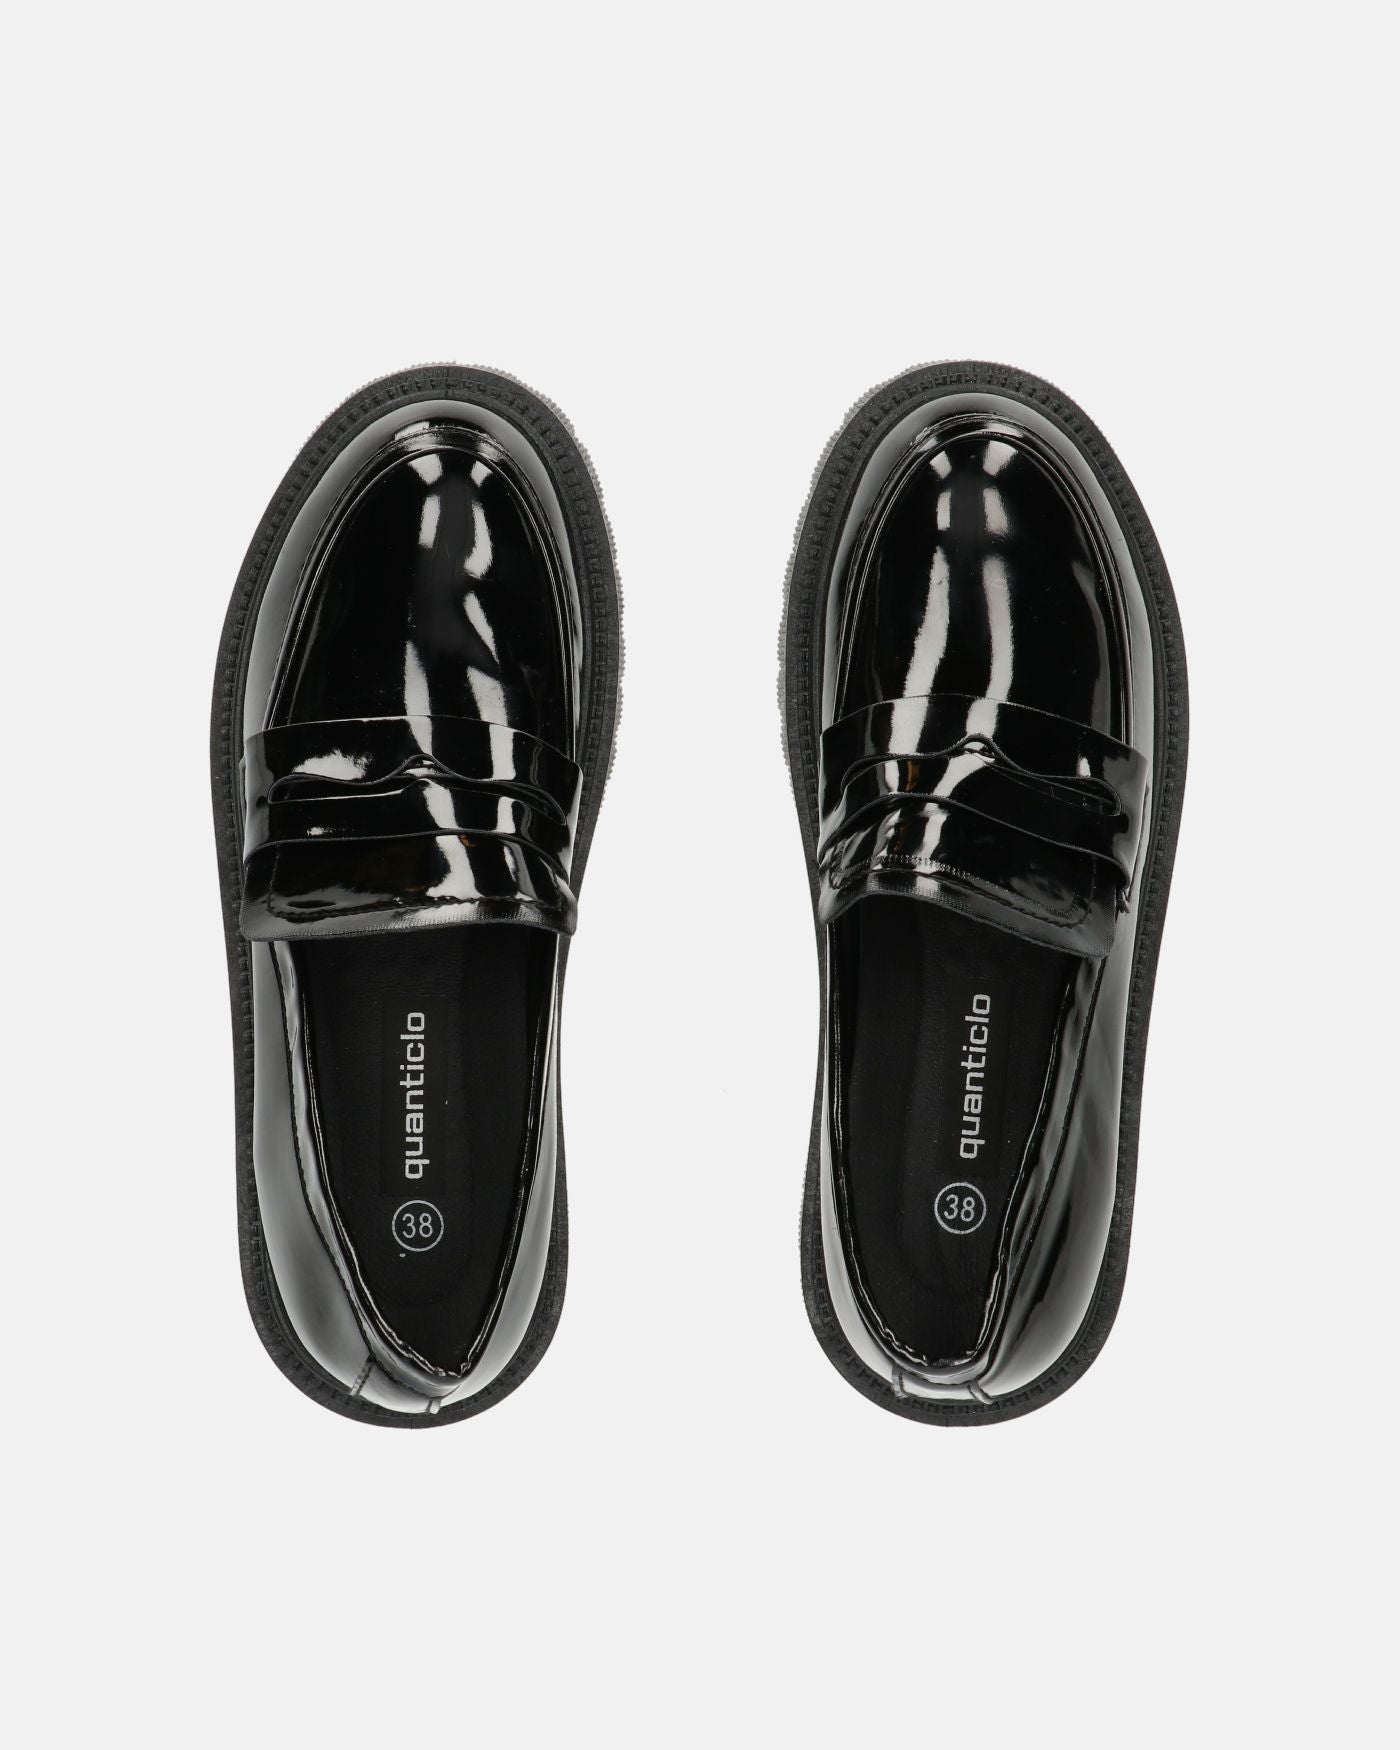 MINNIE - flat shoes in black glassy with heel